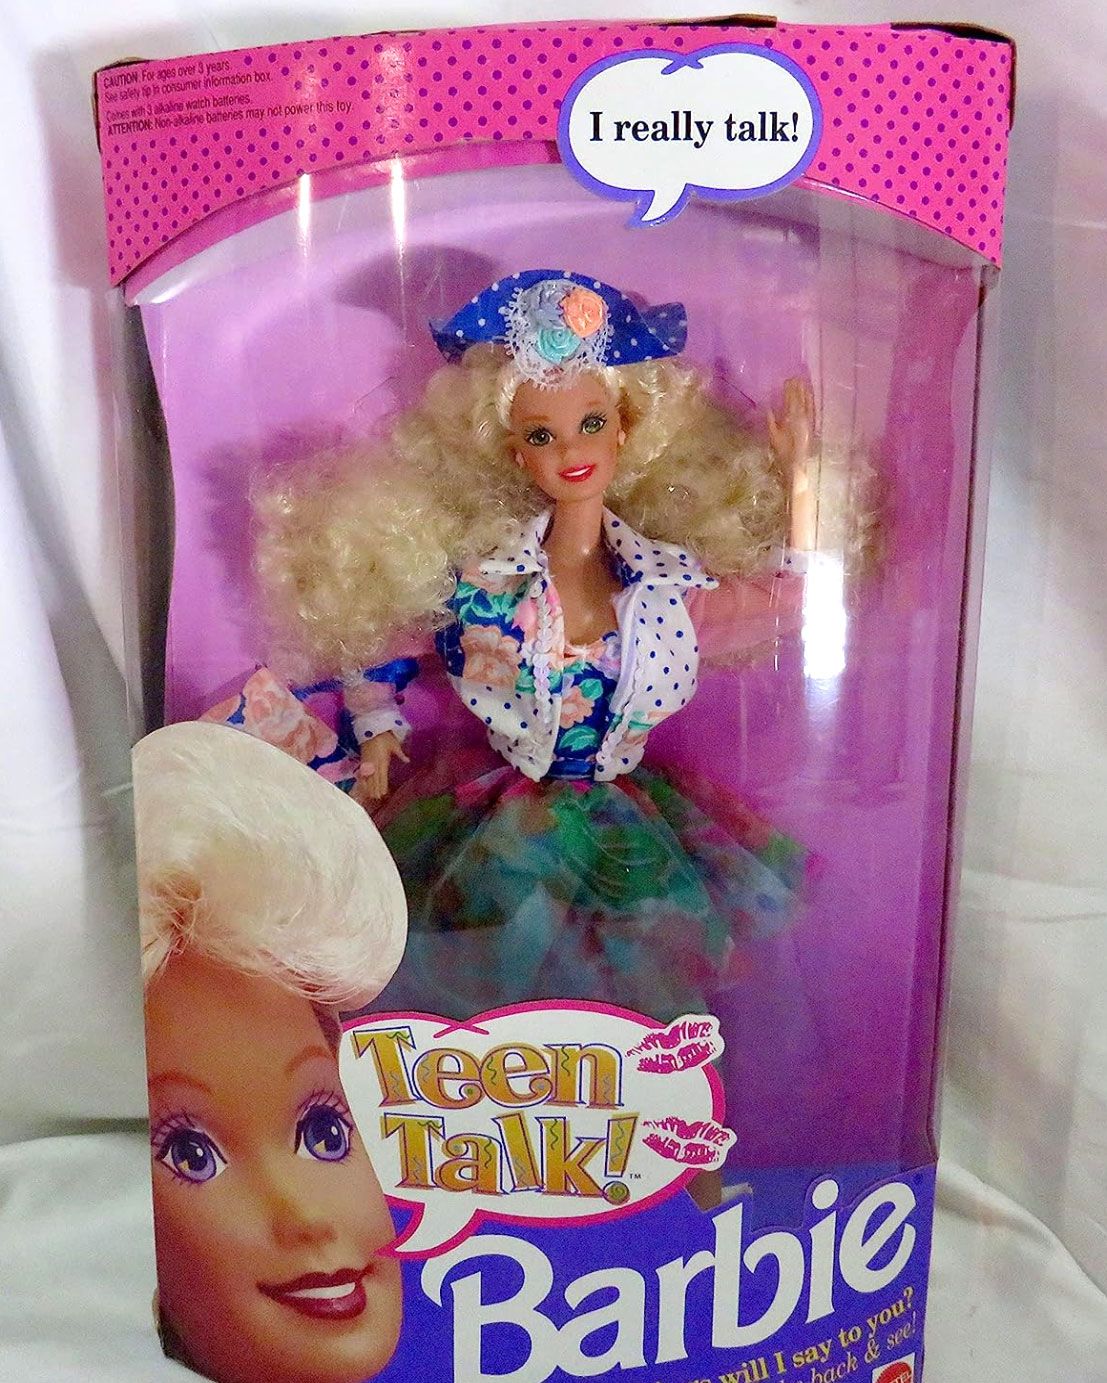 All the Discontinued Dolls Featured in 'Barbie': Allan, Midge, Earring  Magic Ken and More